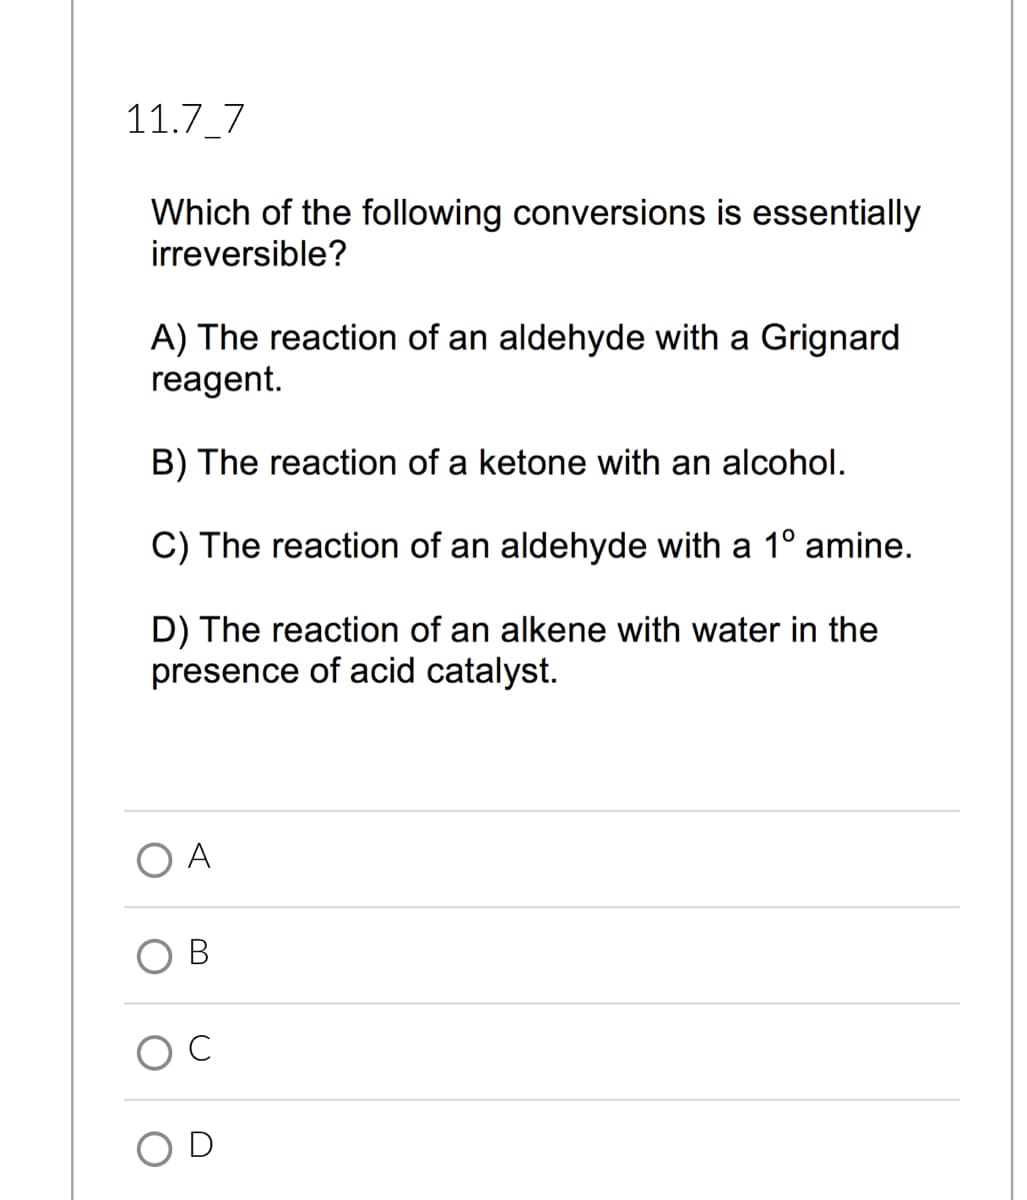 11.7_7
Which of the following conversions is essentially
irreversible?
A) The reaction of an aldehyde with a Grignard
reagent.
B) The reaction of a ketone with an alcohol.
C) The reaction of an aldehyde with a 1° amine.
D) The reaction of an alkene with water in the
presence of acid catalyst.
A
